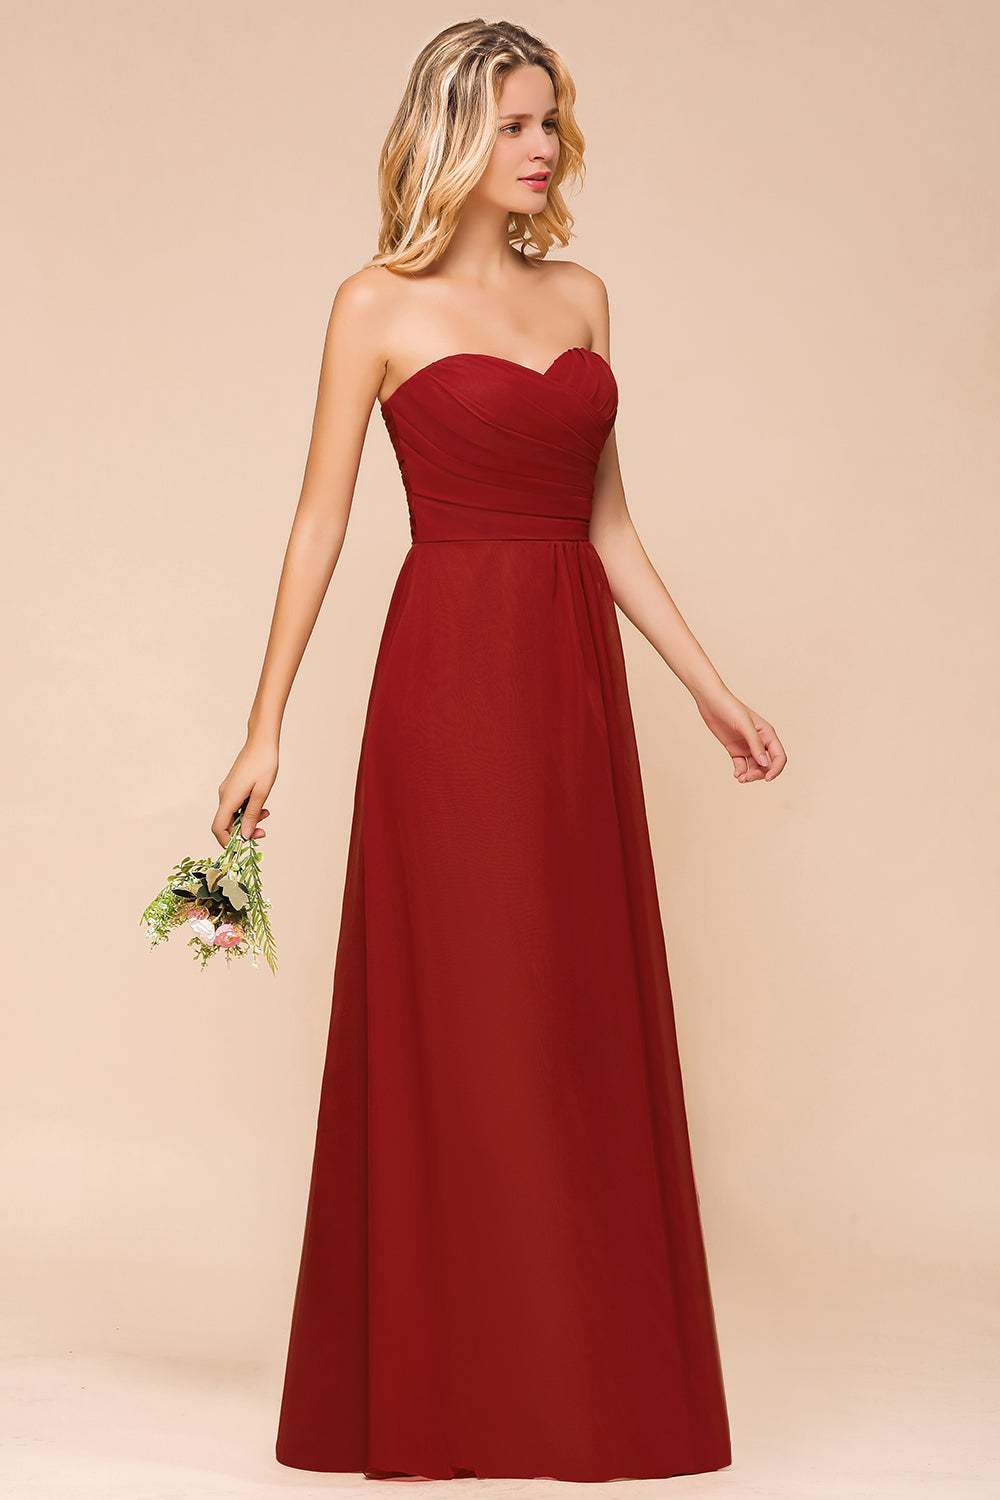 Gorgeous Sweetheart Strapless Rust Bridesmaid Dresses with Ruffle-27dress